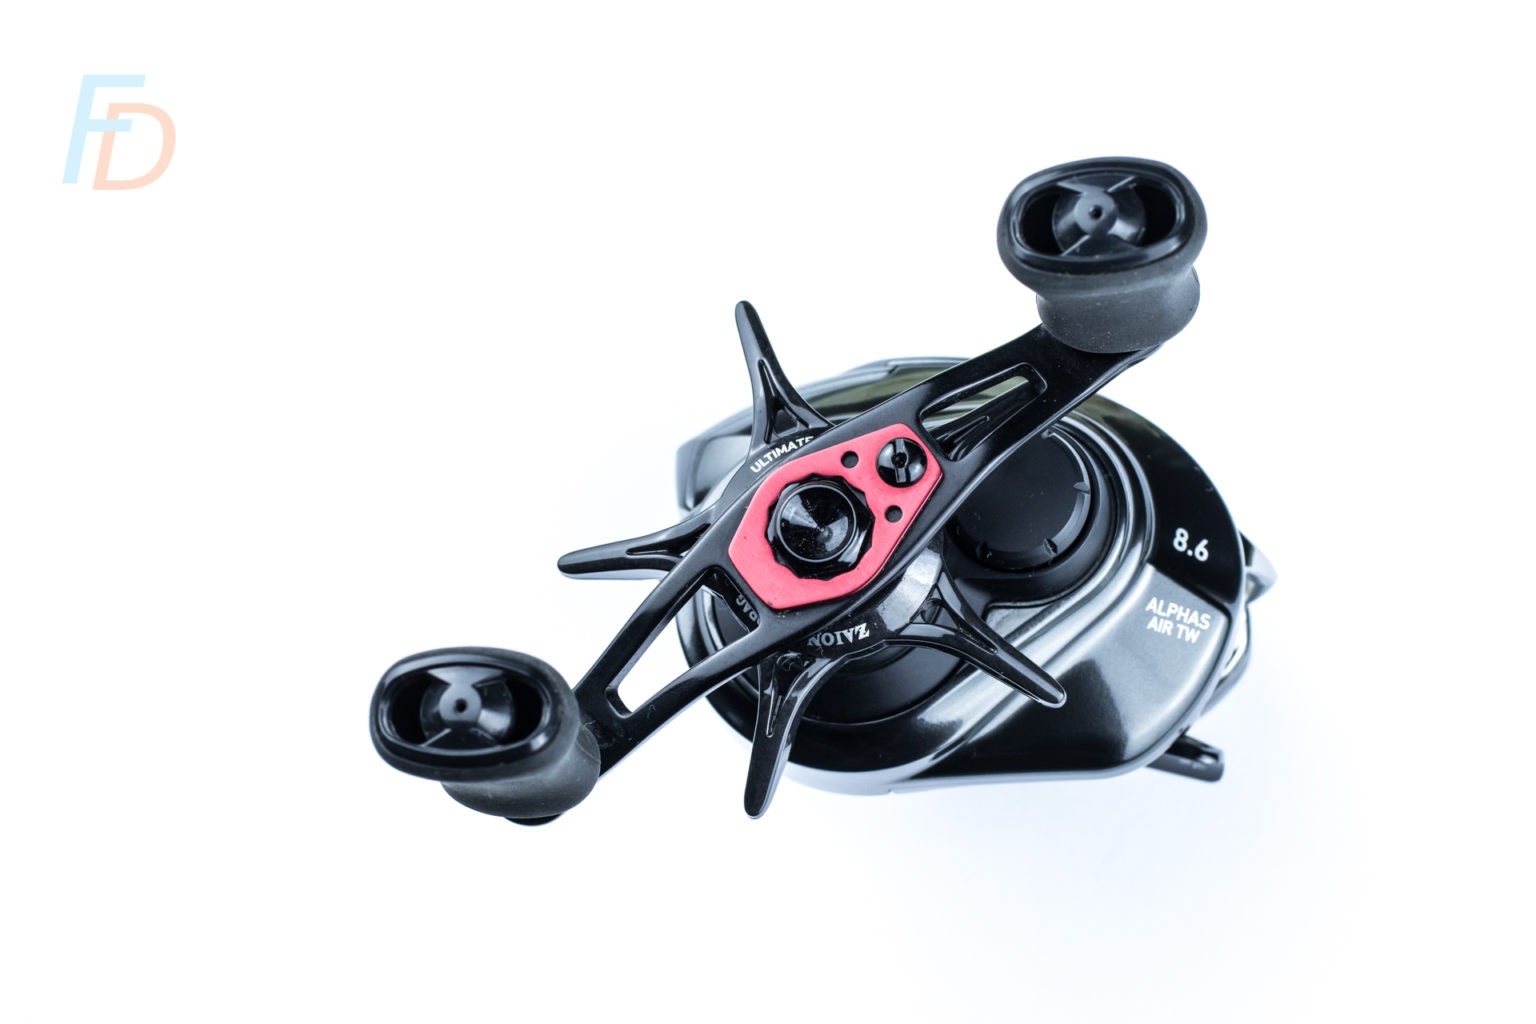 Daiwa Alphas Air TW 20: What’s all the Fuss About?